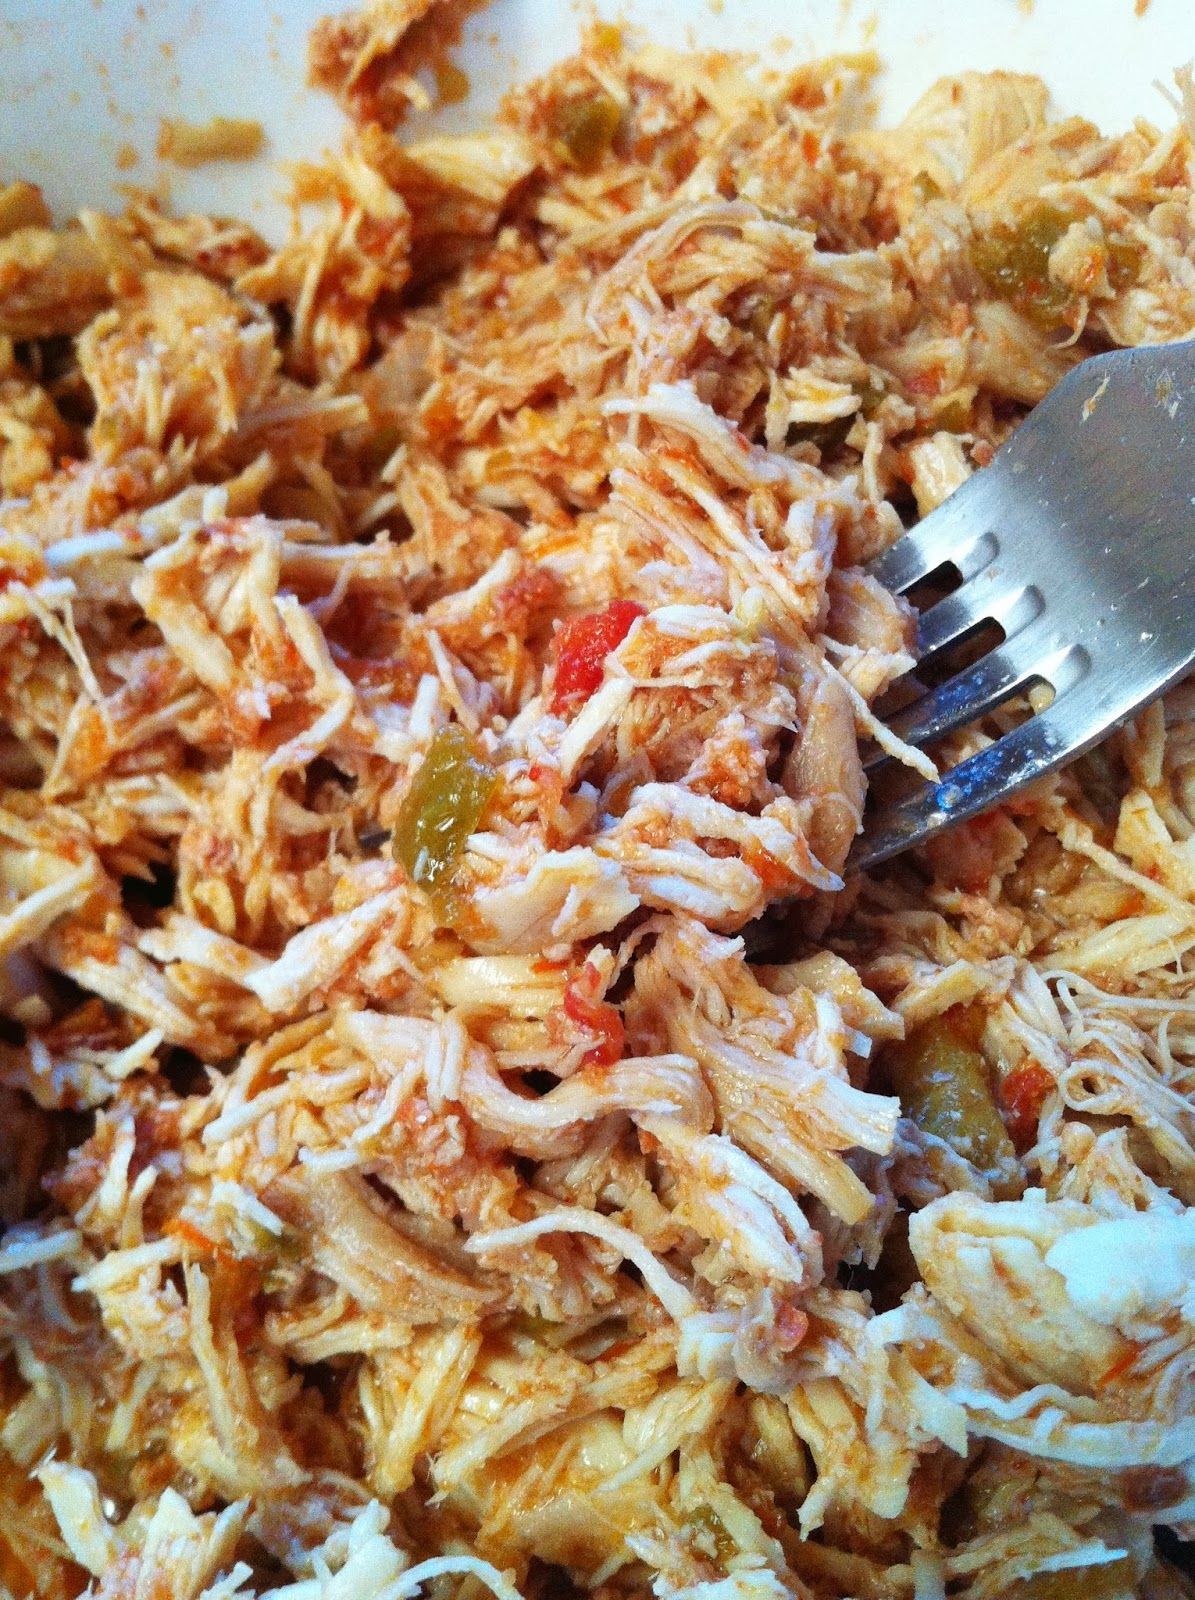 Shredded Salsa Chicken with Whole30 approved salsa